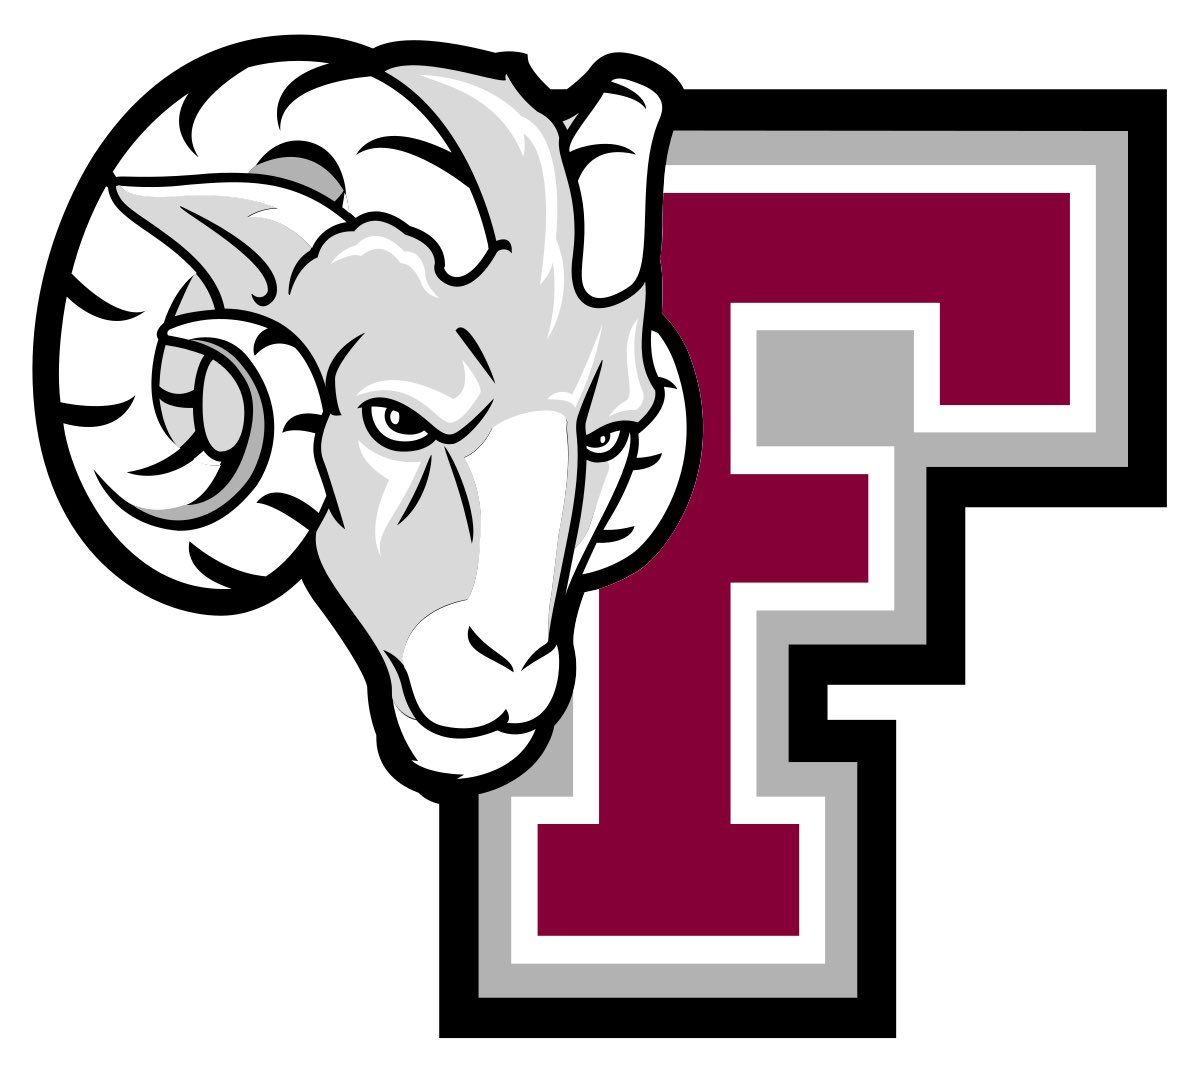 beyond blessed to receive my 7th division 1 offer from Fordham University‼️ @CoachDeckRamU @FORDHAMFOOTBALL @JonathanWholley @CoachDellSJ #GlorytoGod